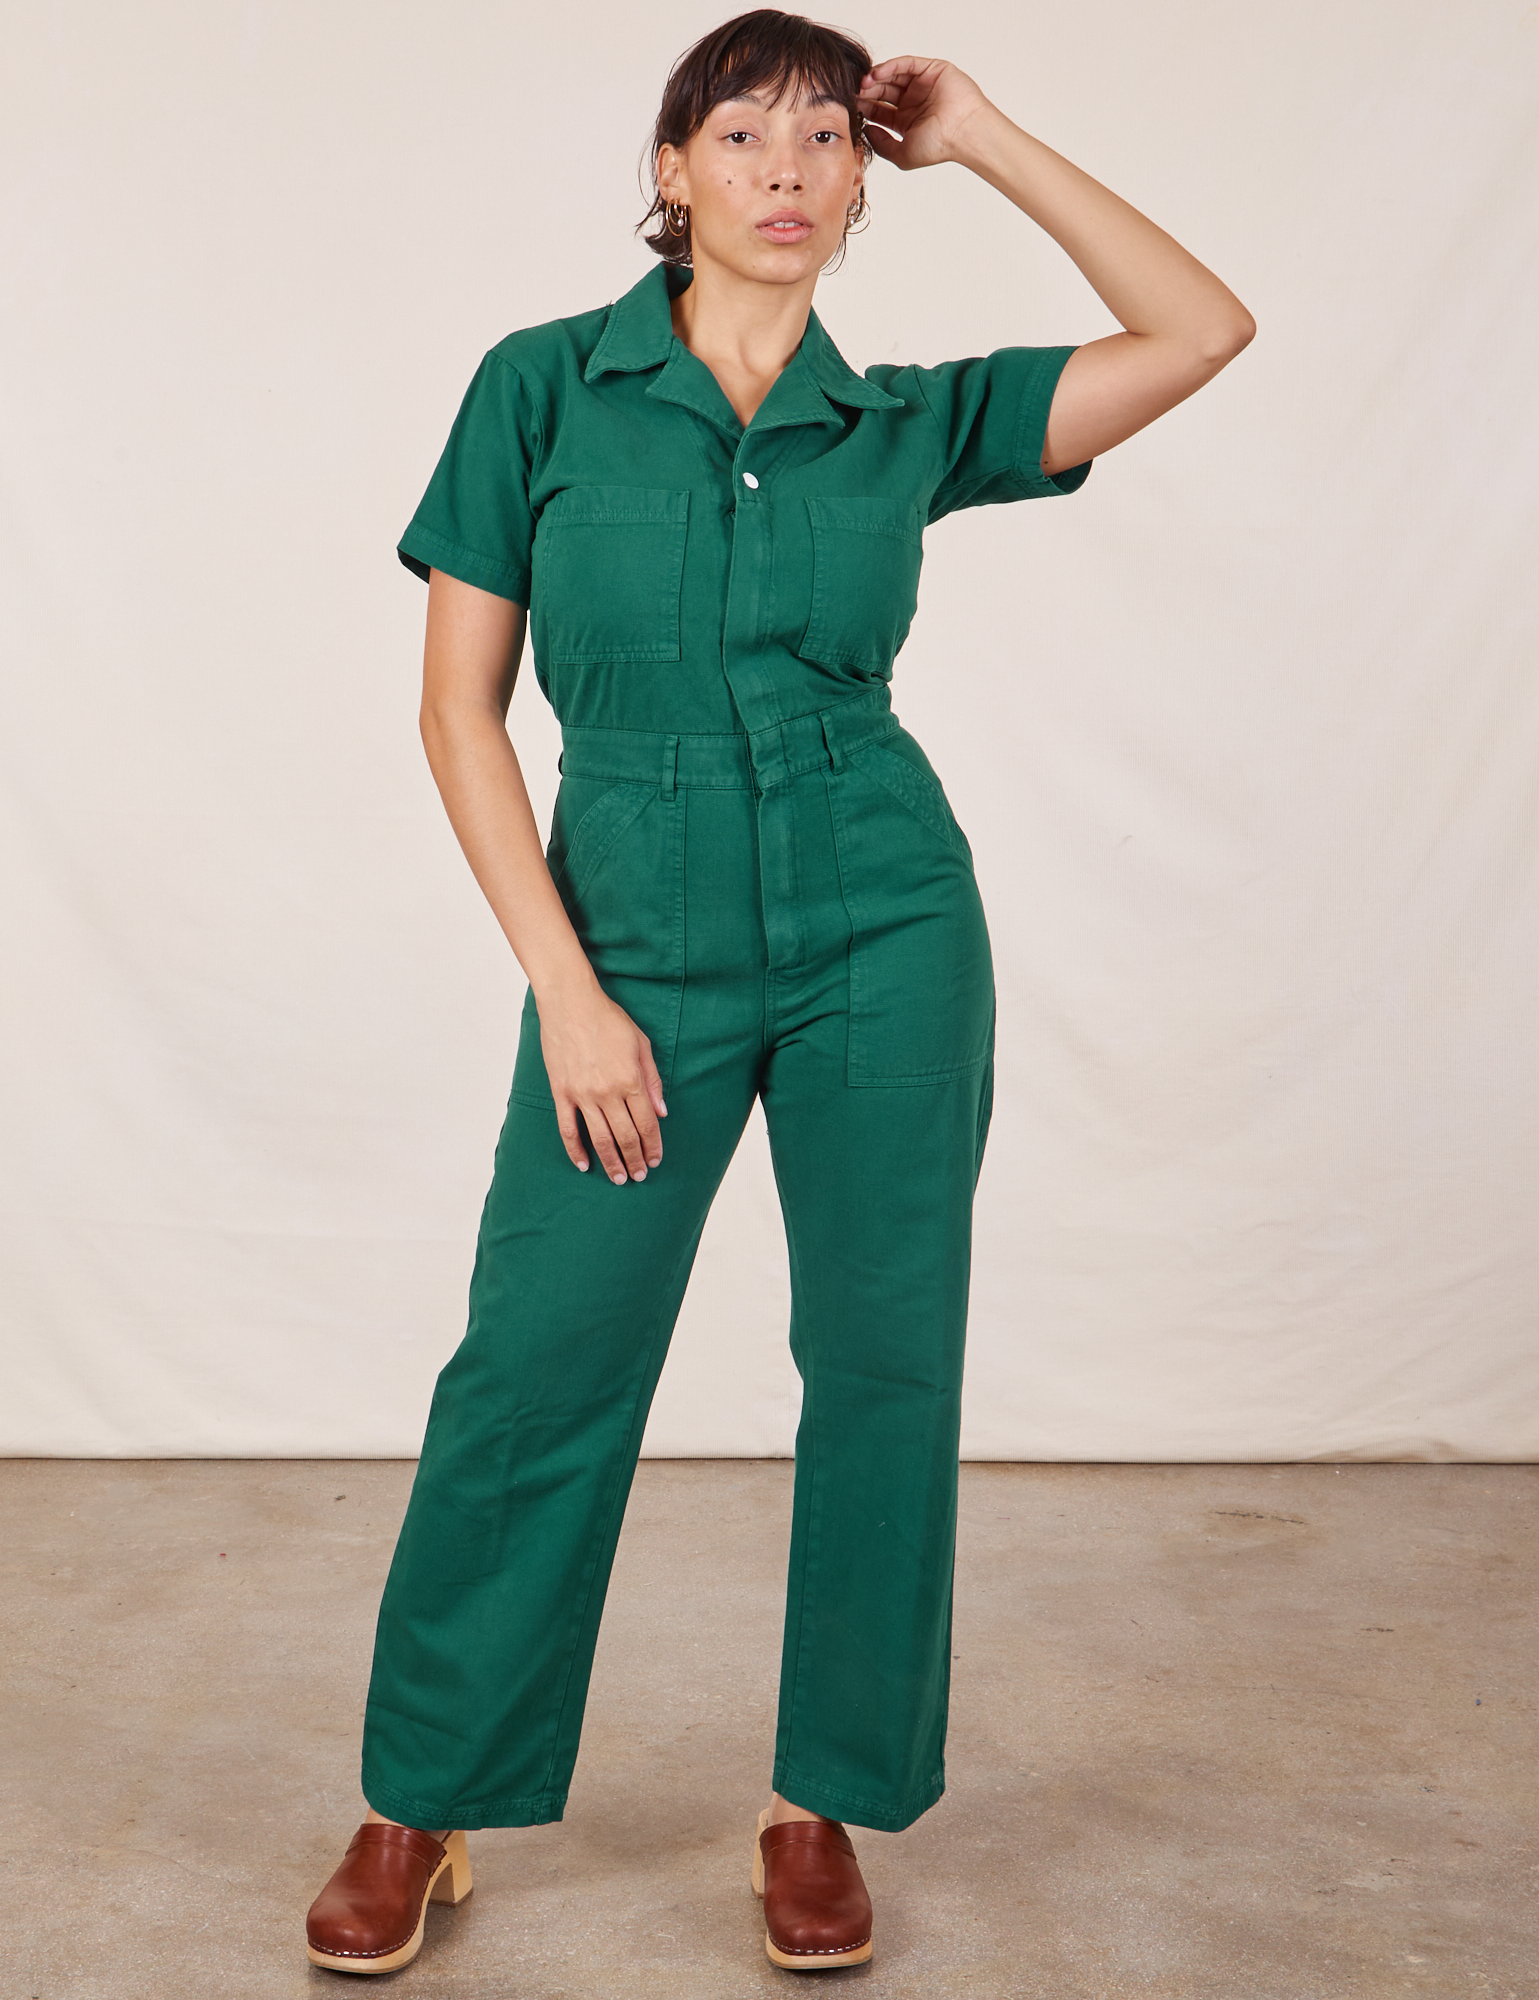 Tiara is 5'4" and wearing S Short Sleeve Jumpsuit in Hunter Green